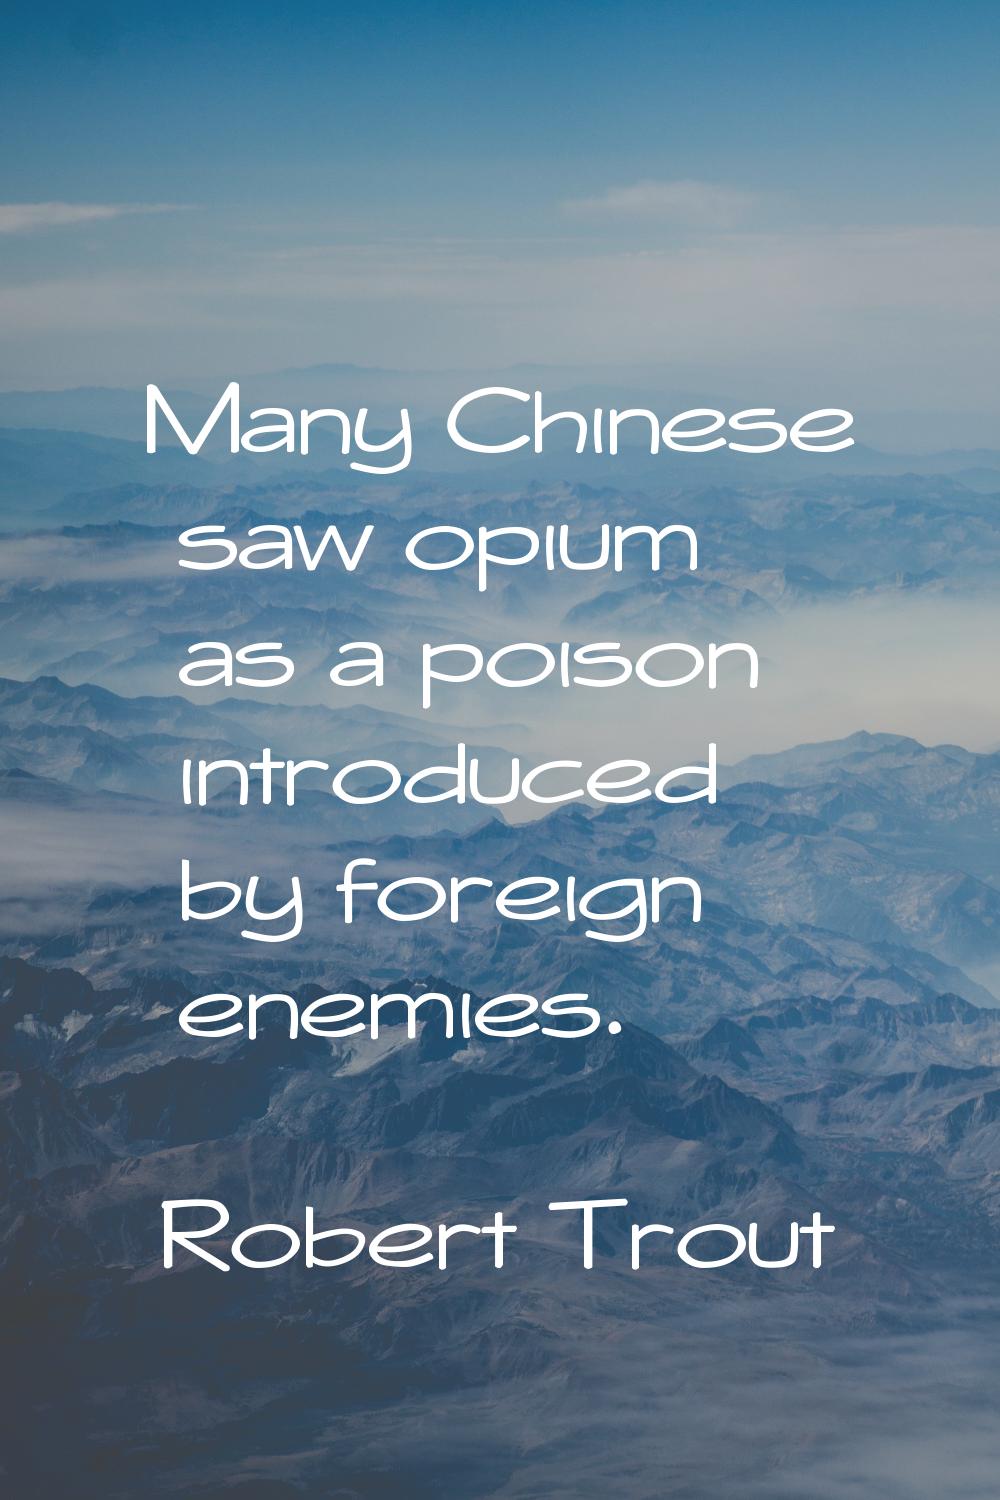 Many Chinese saw opium as a poison introduced by foreign enemies.